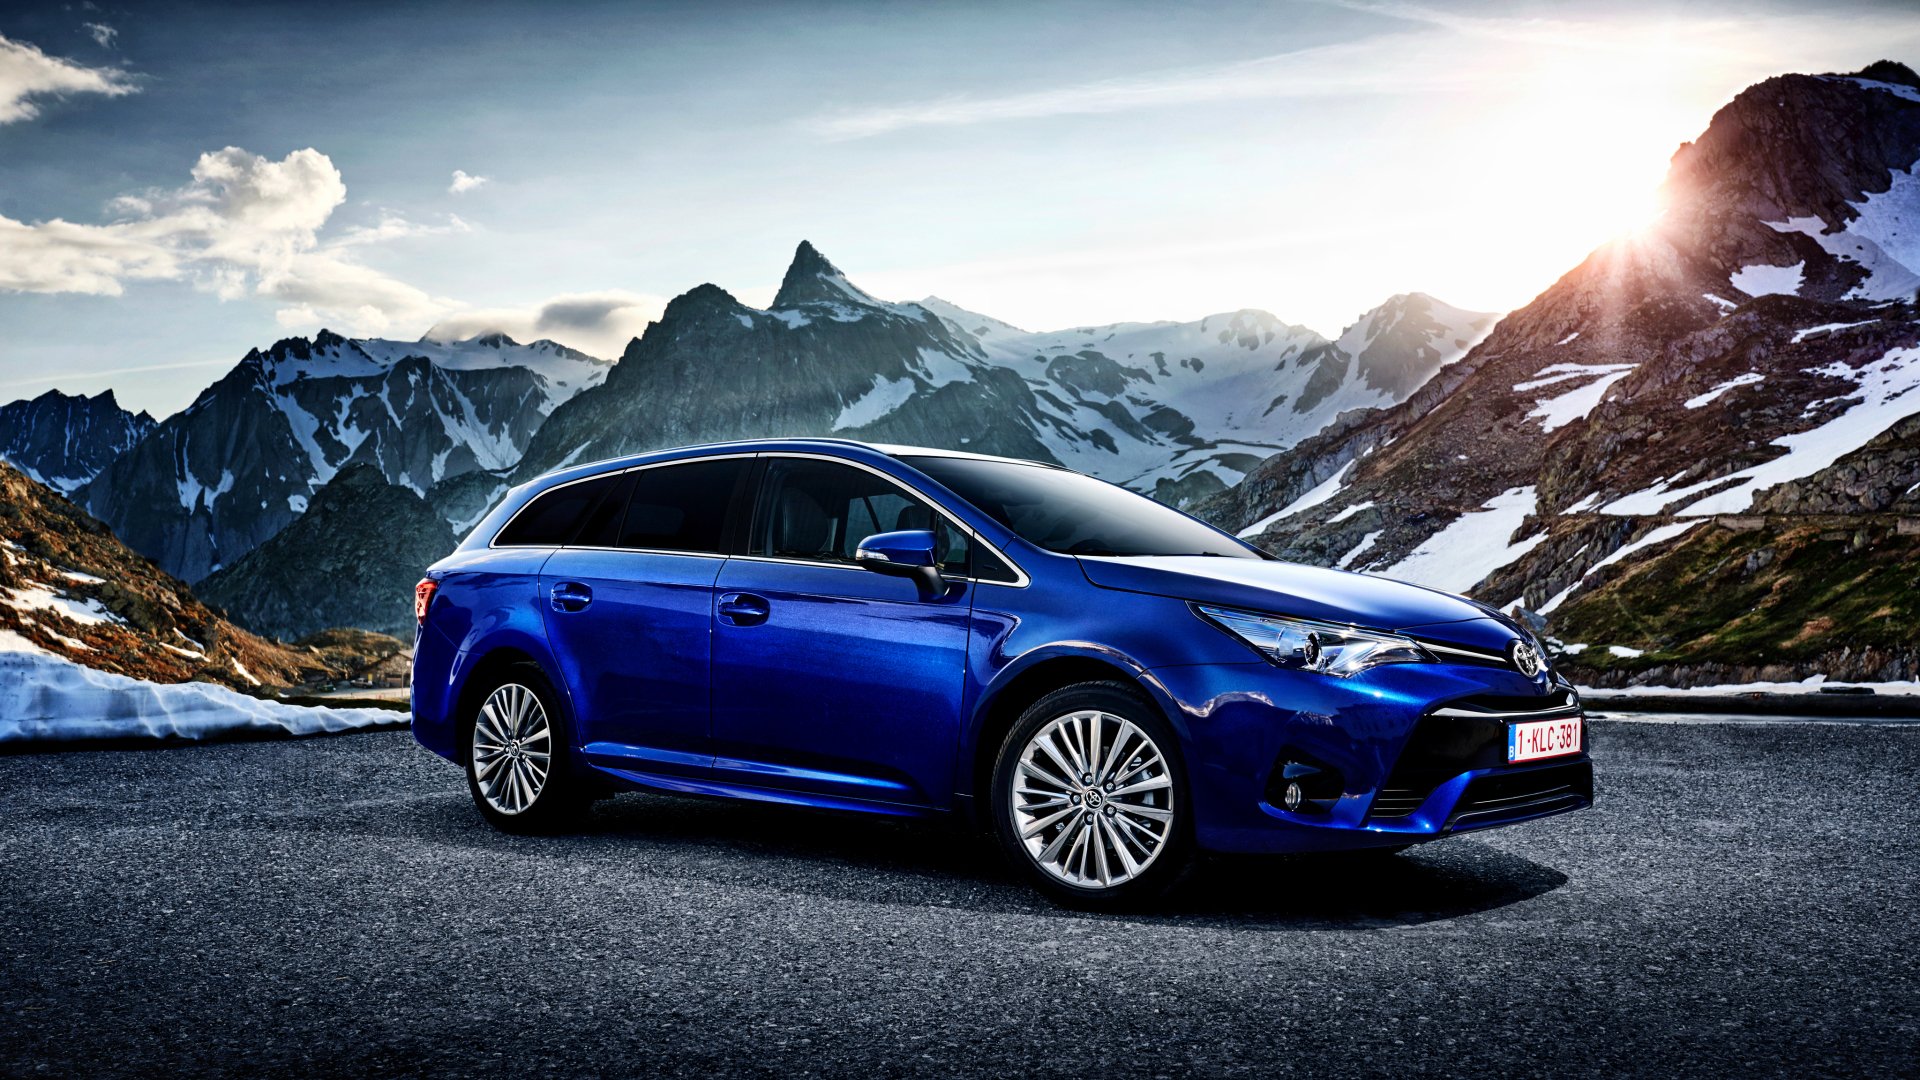 4K Toyota Avensis Wallpaper and Background Image